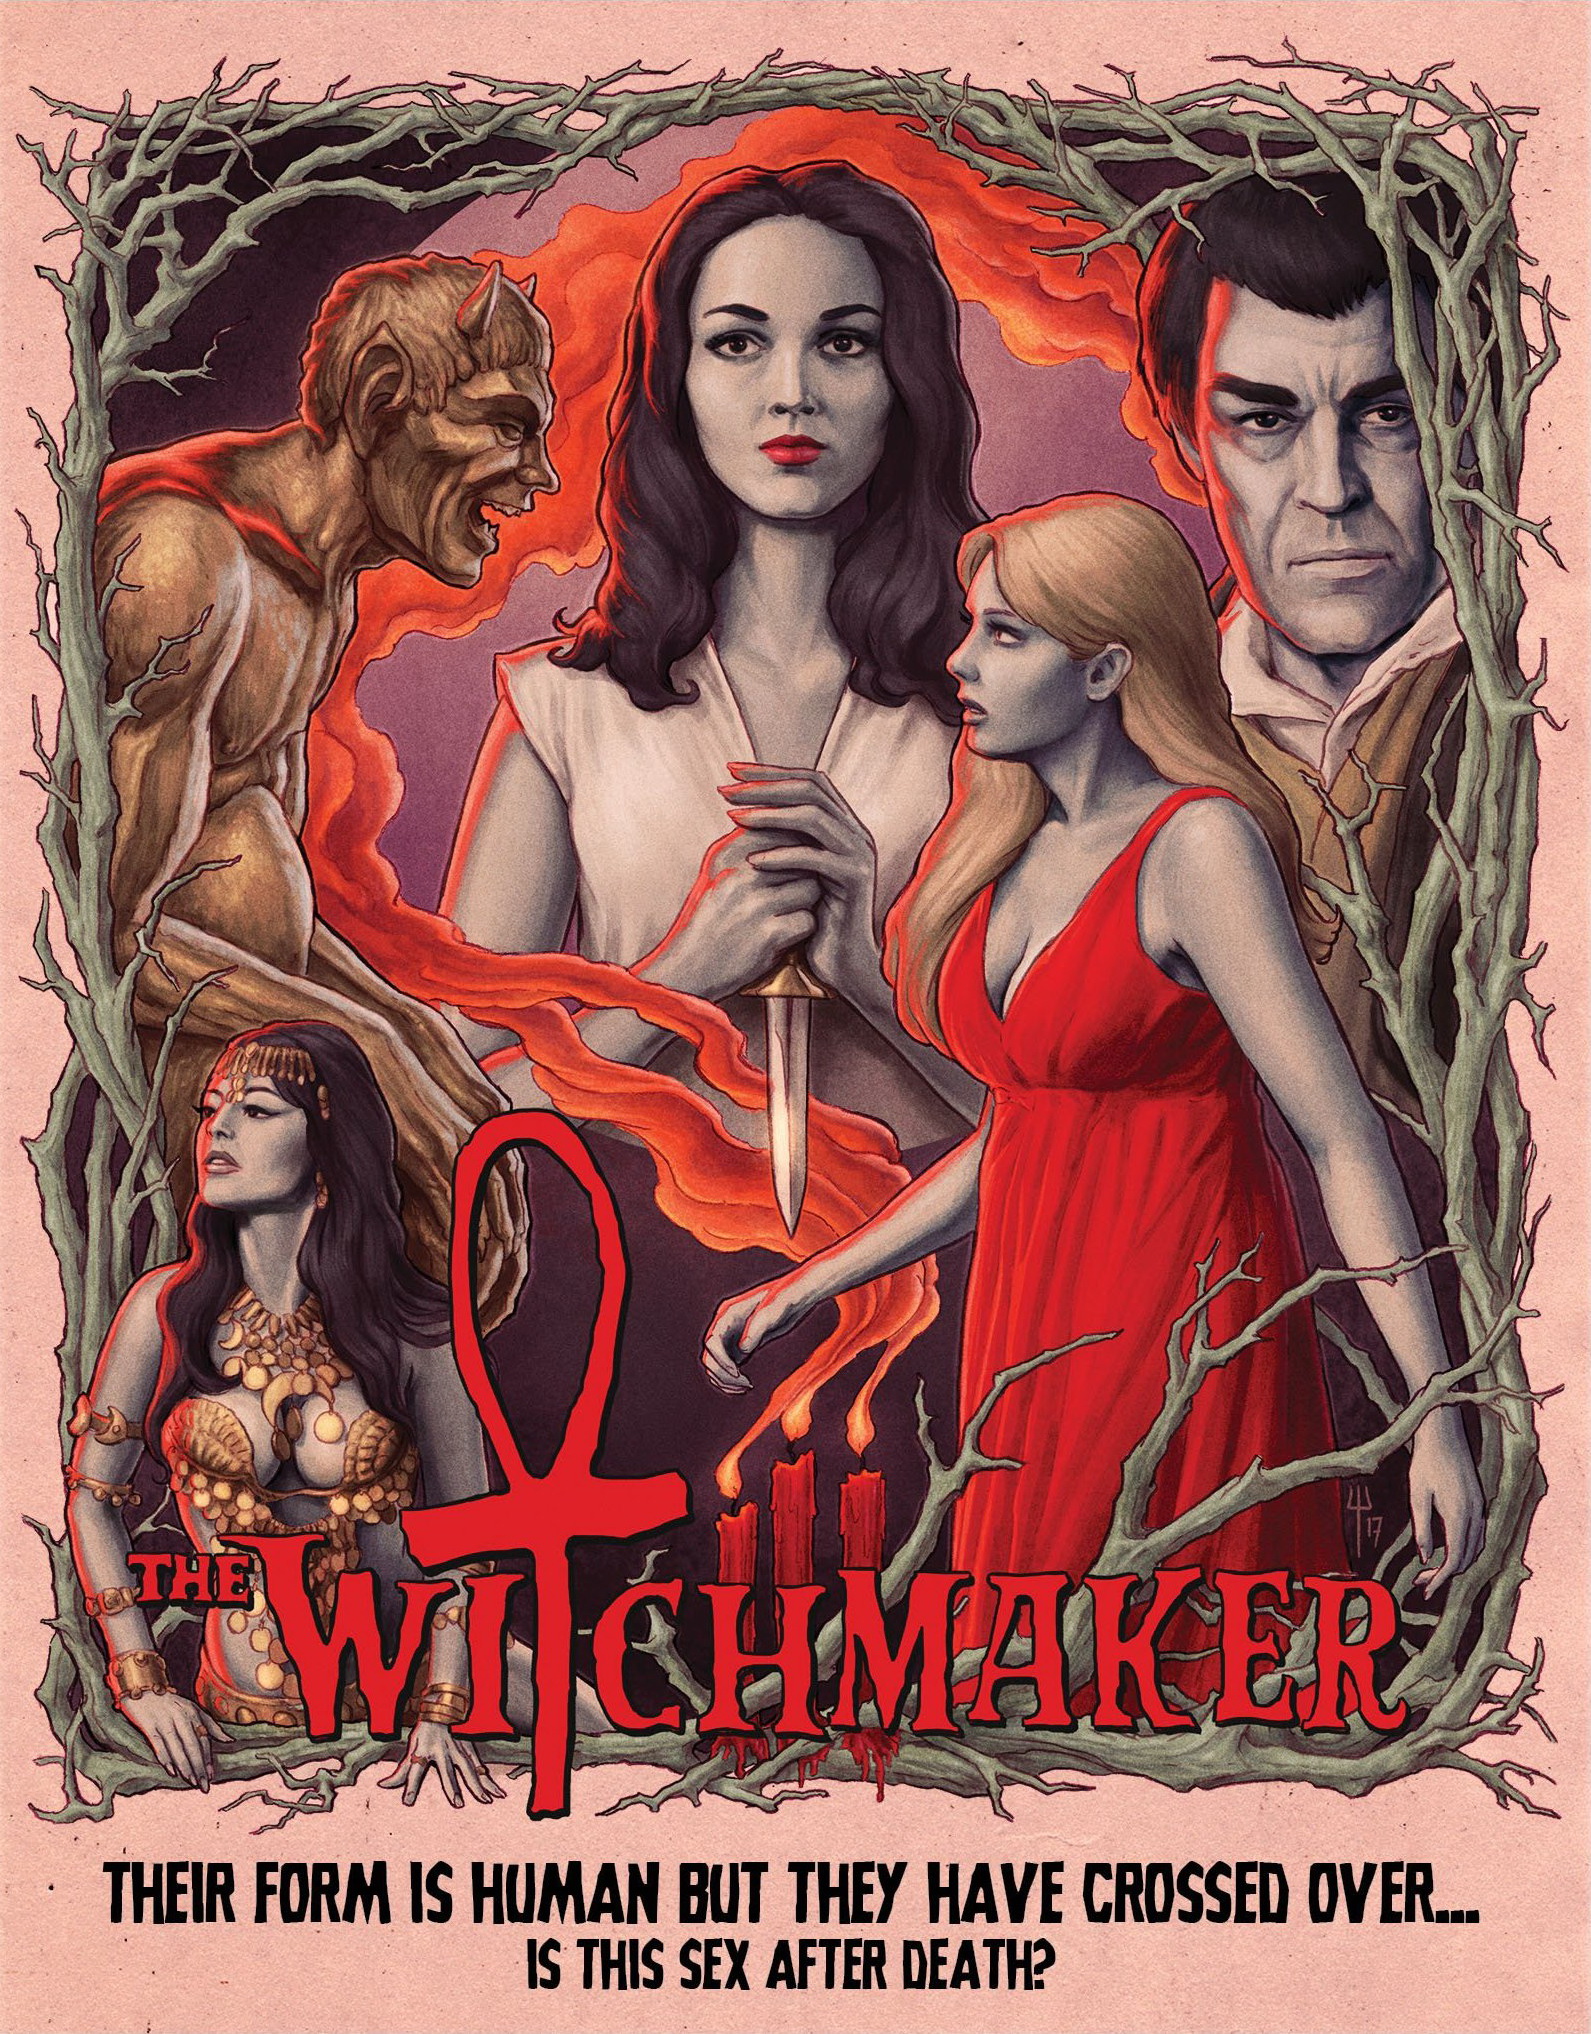 The witchmaker